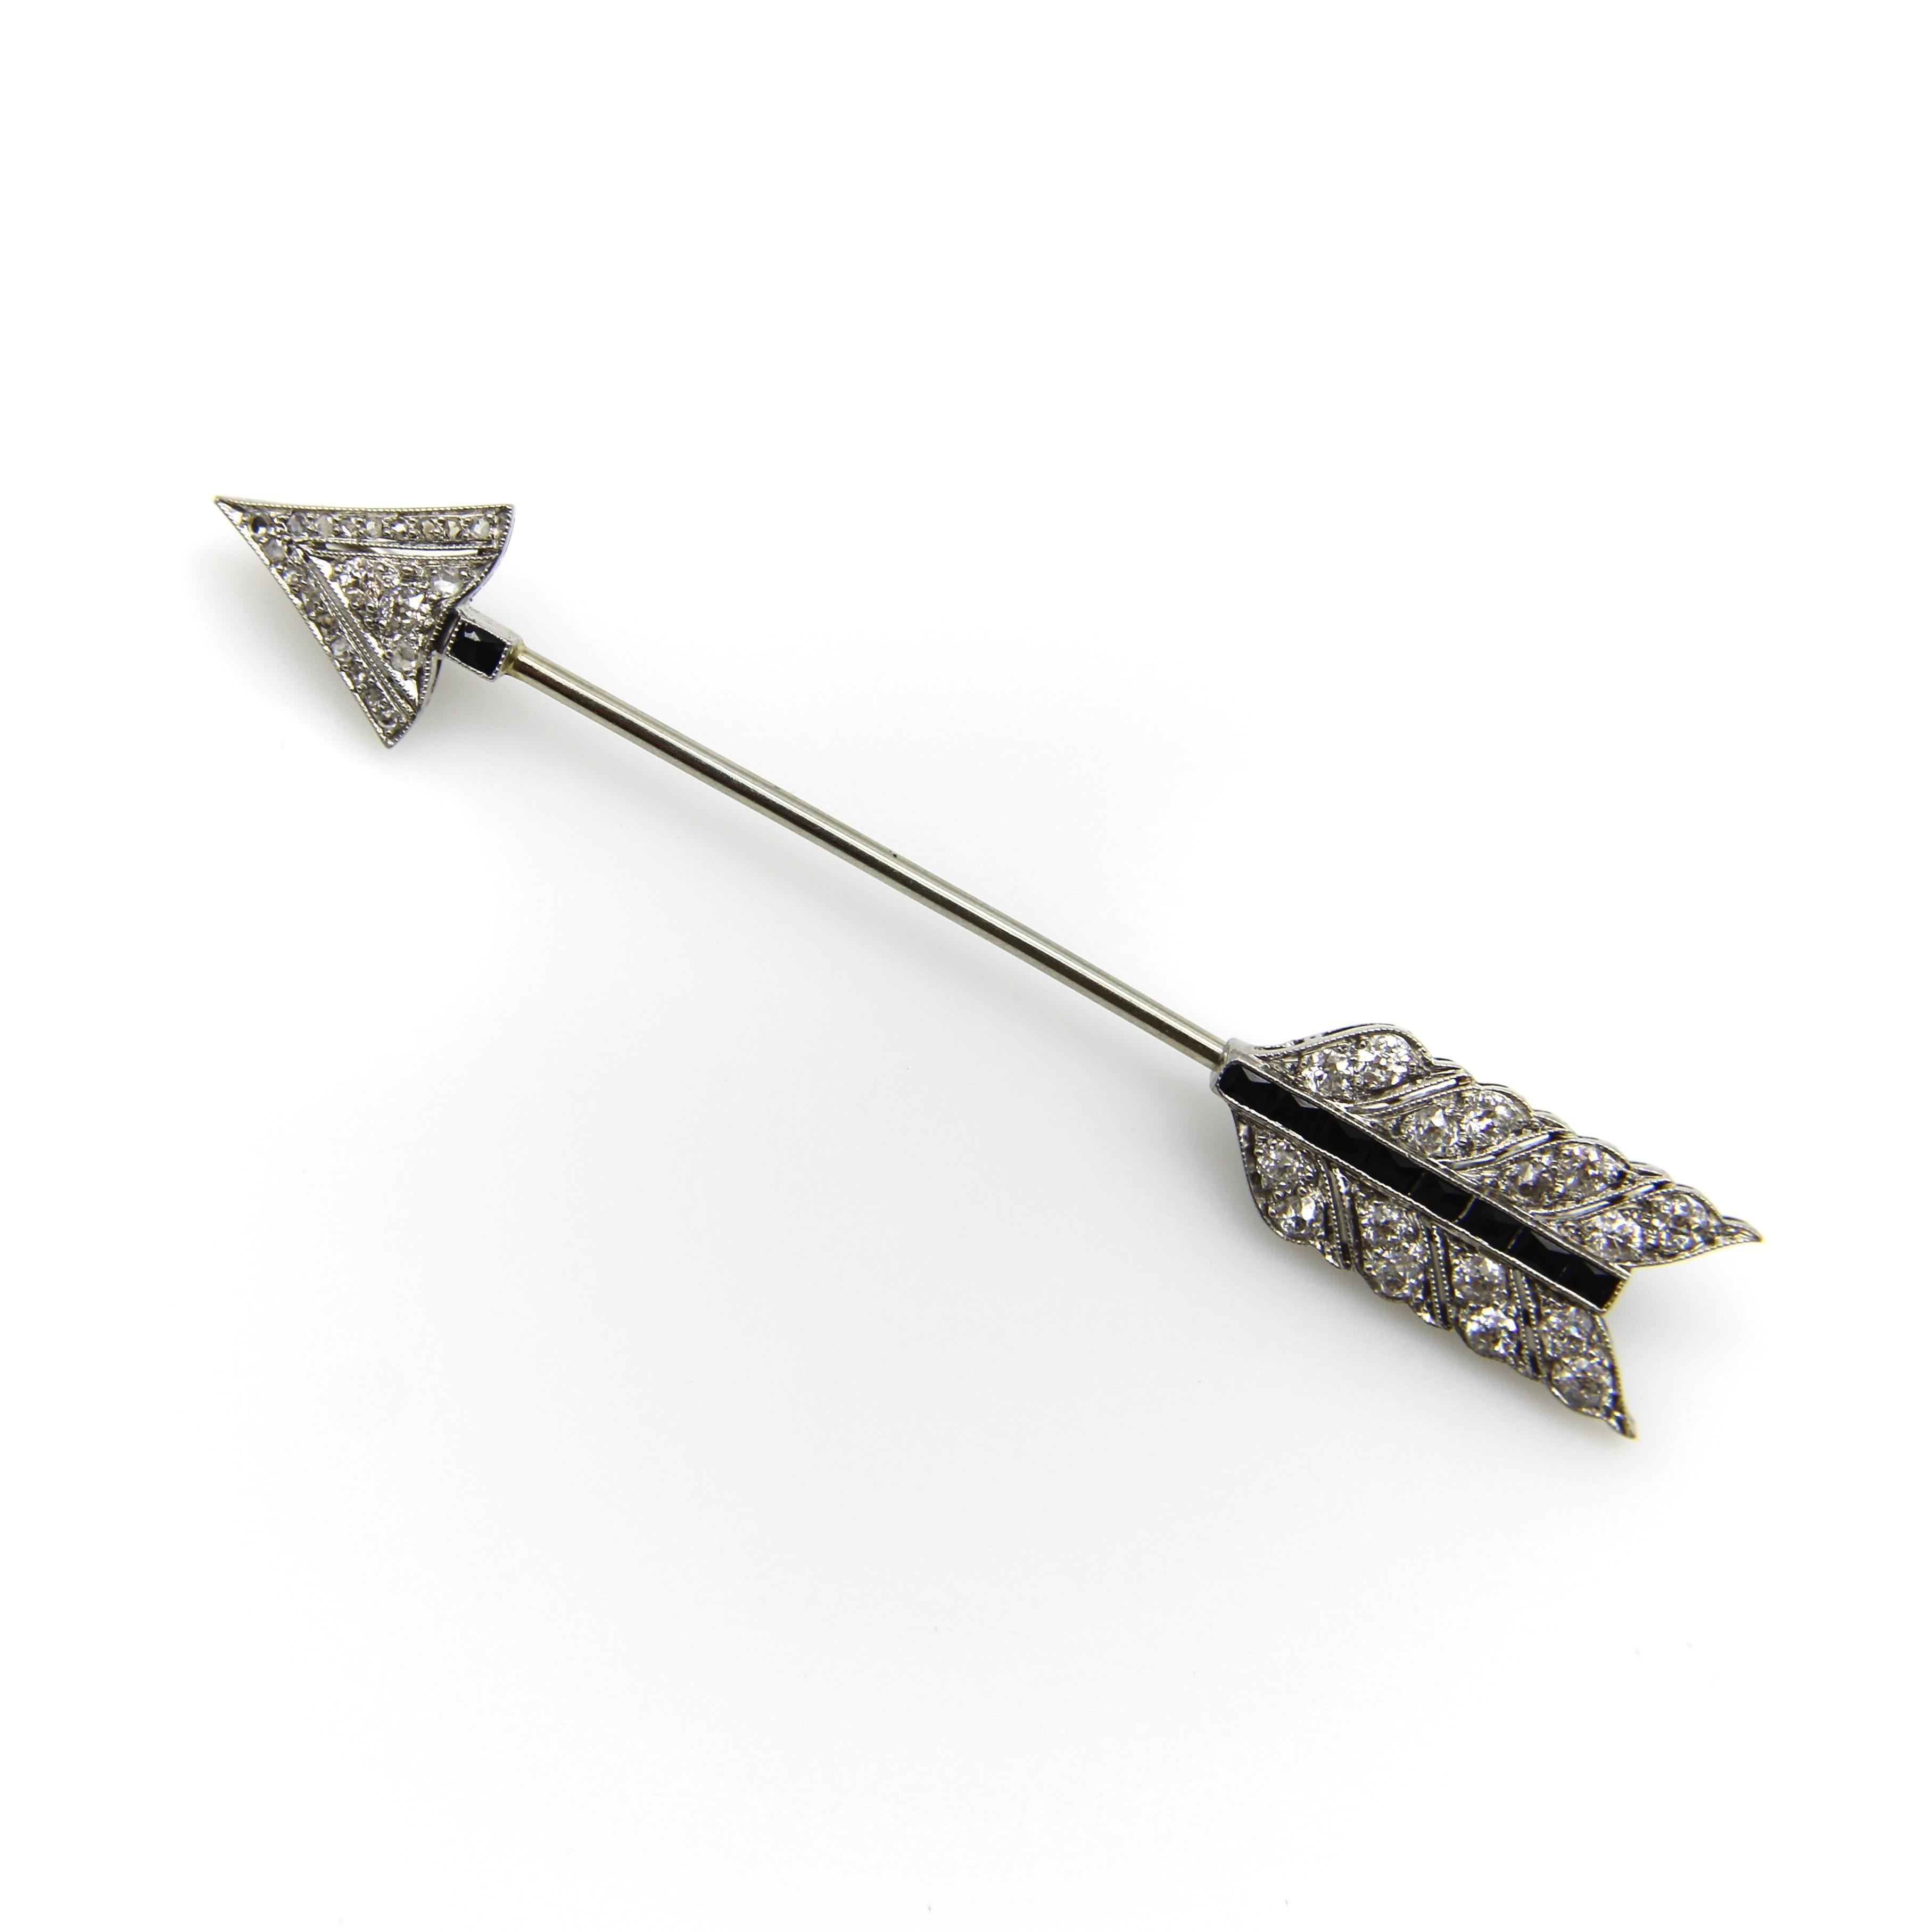 We’ve made this Art Deco platinum jabot pin multifunctional by adding two bails so that it can be worn on a chain as well as its original function as a Jabot. The pendant is encrusted with diamonds and onyx. The point of the arrow contains tiny Rose